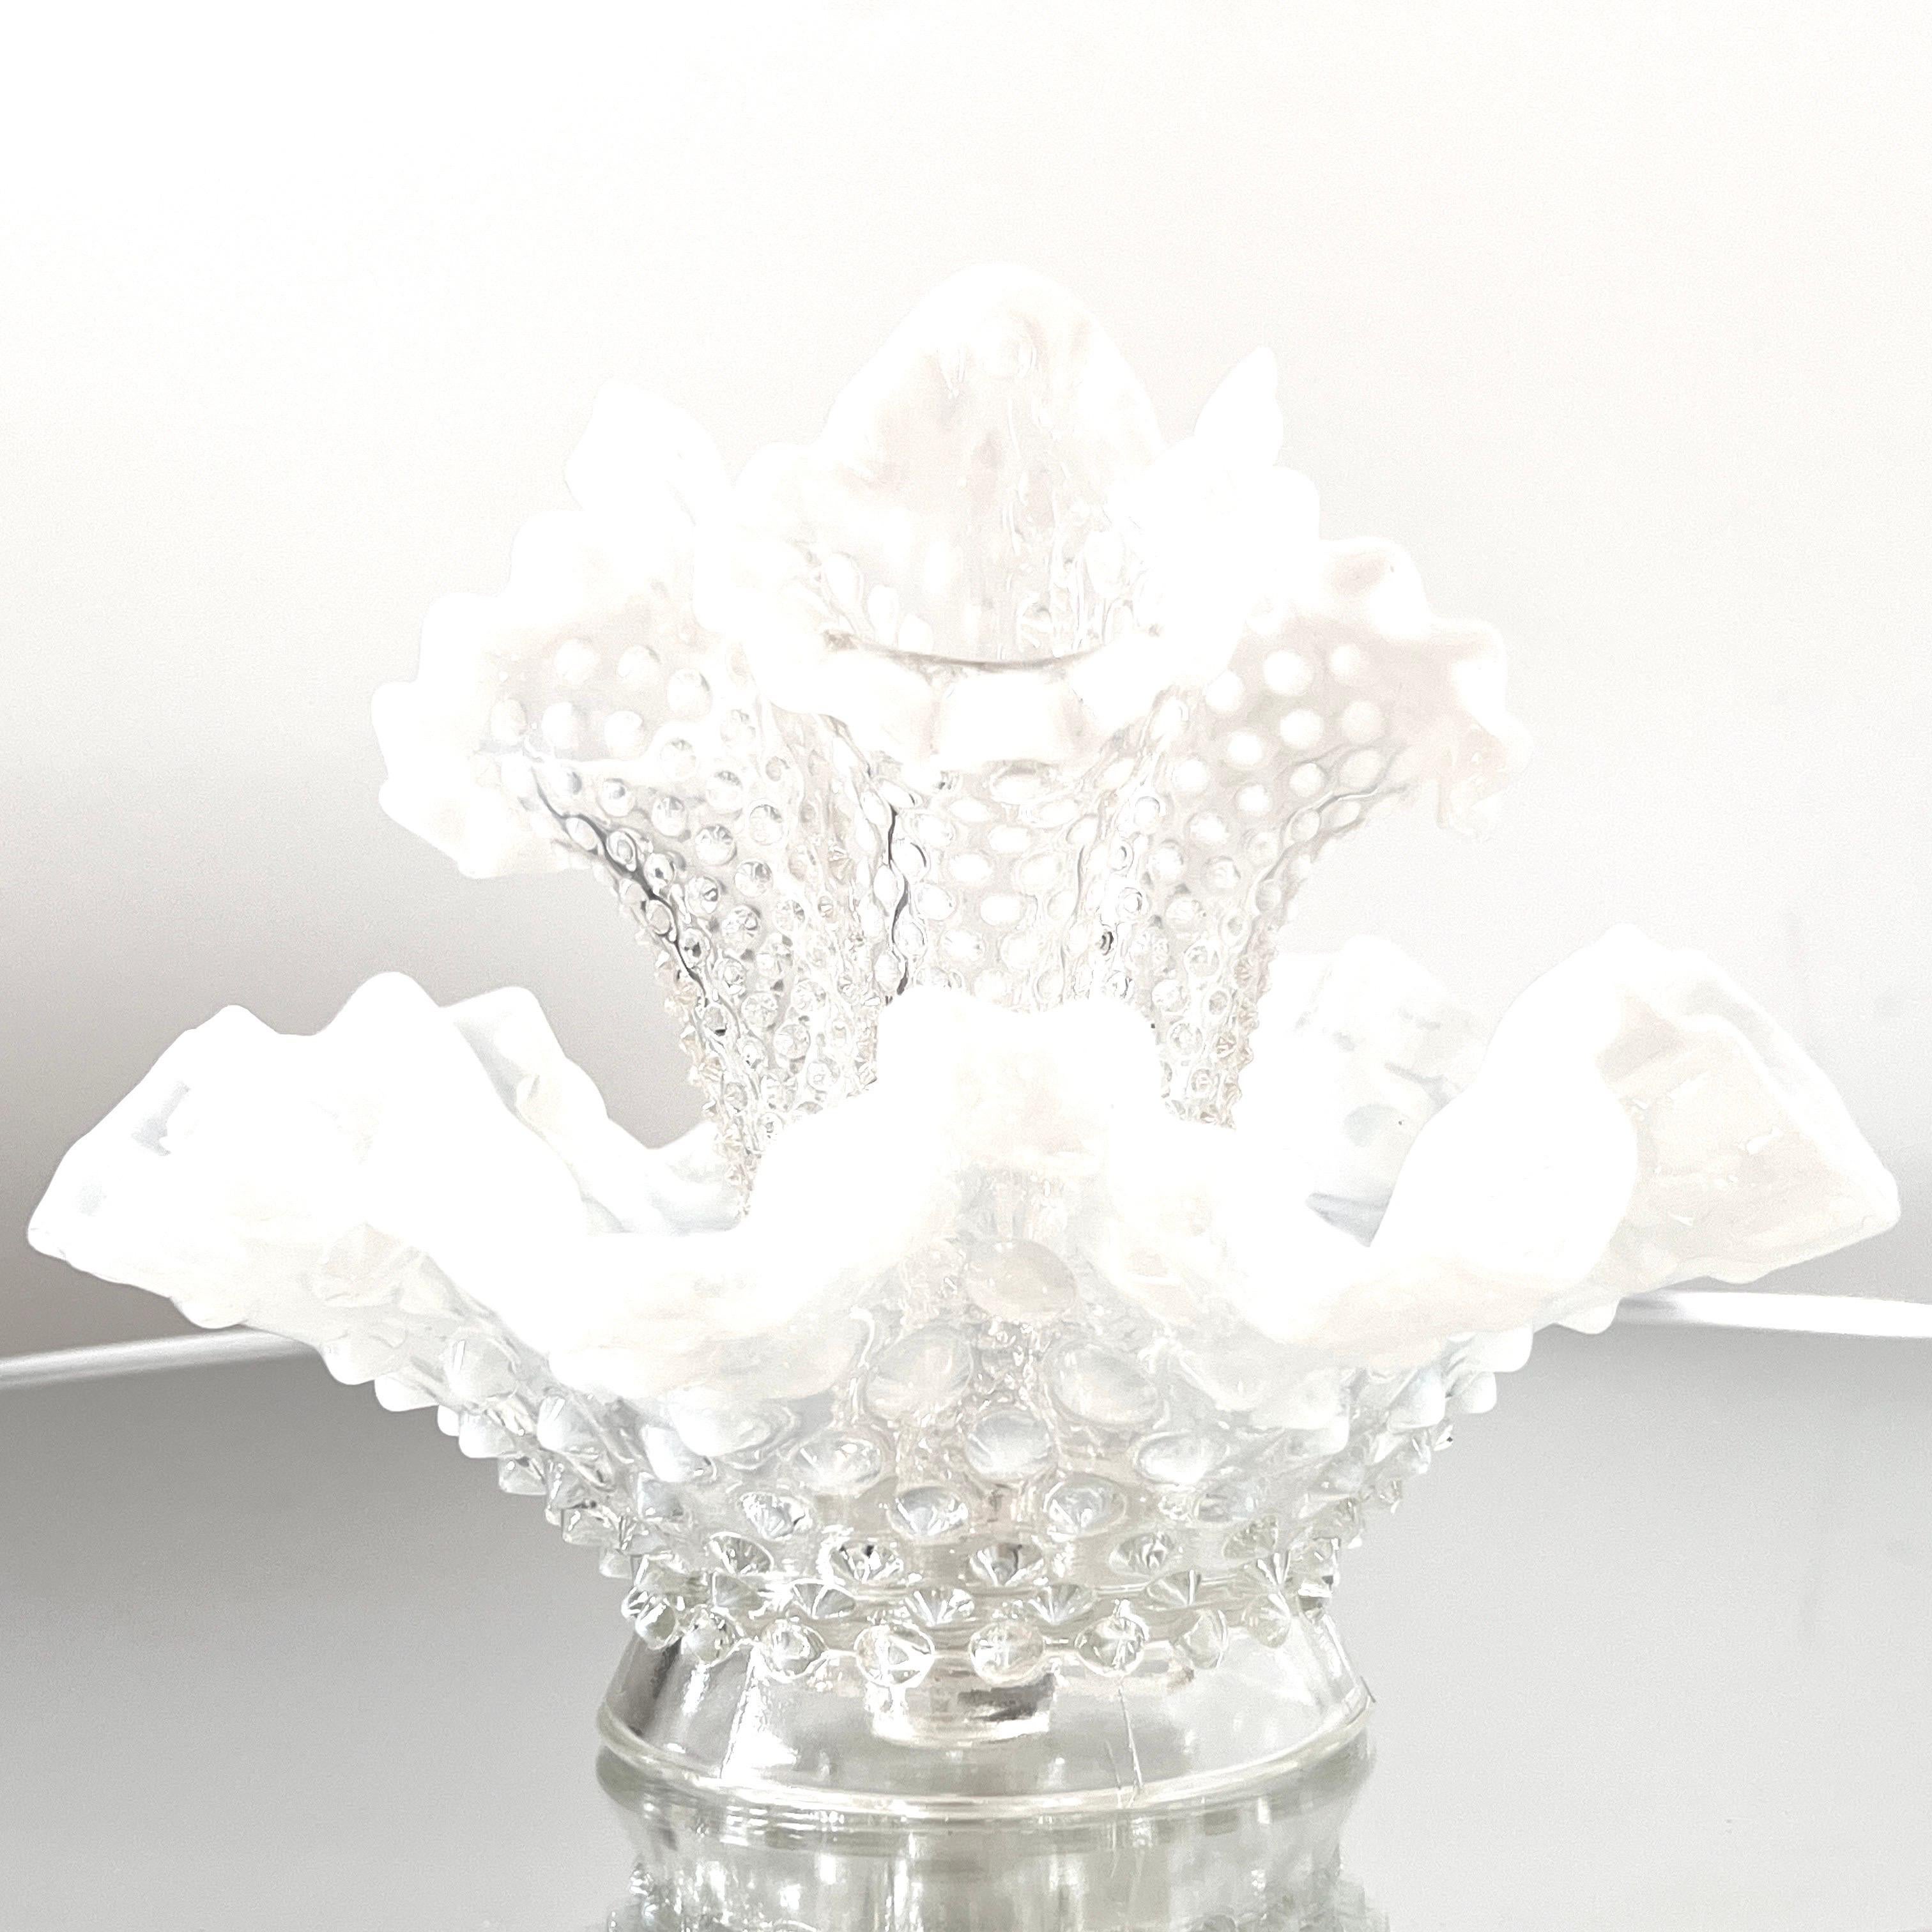 Inspired by Victorian Era design, this vintage epergne vase is fitted with three central bud vases. The bud vases have floral forms with removable stems that feature clear diamond point glass and white opaline hobnails. The bowl features a floral